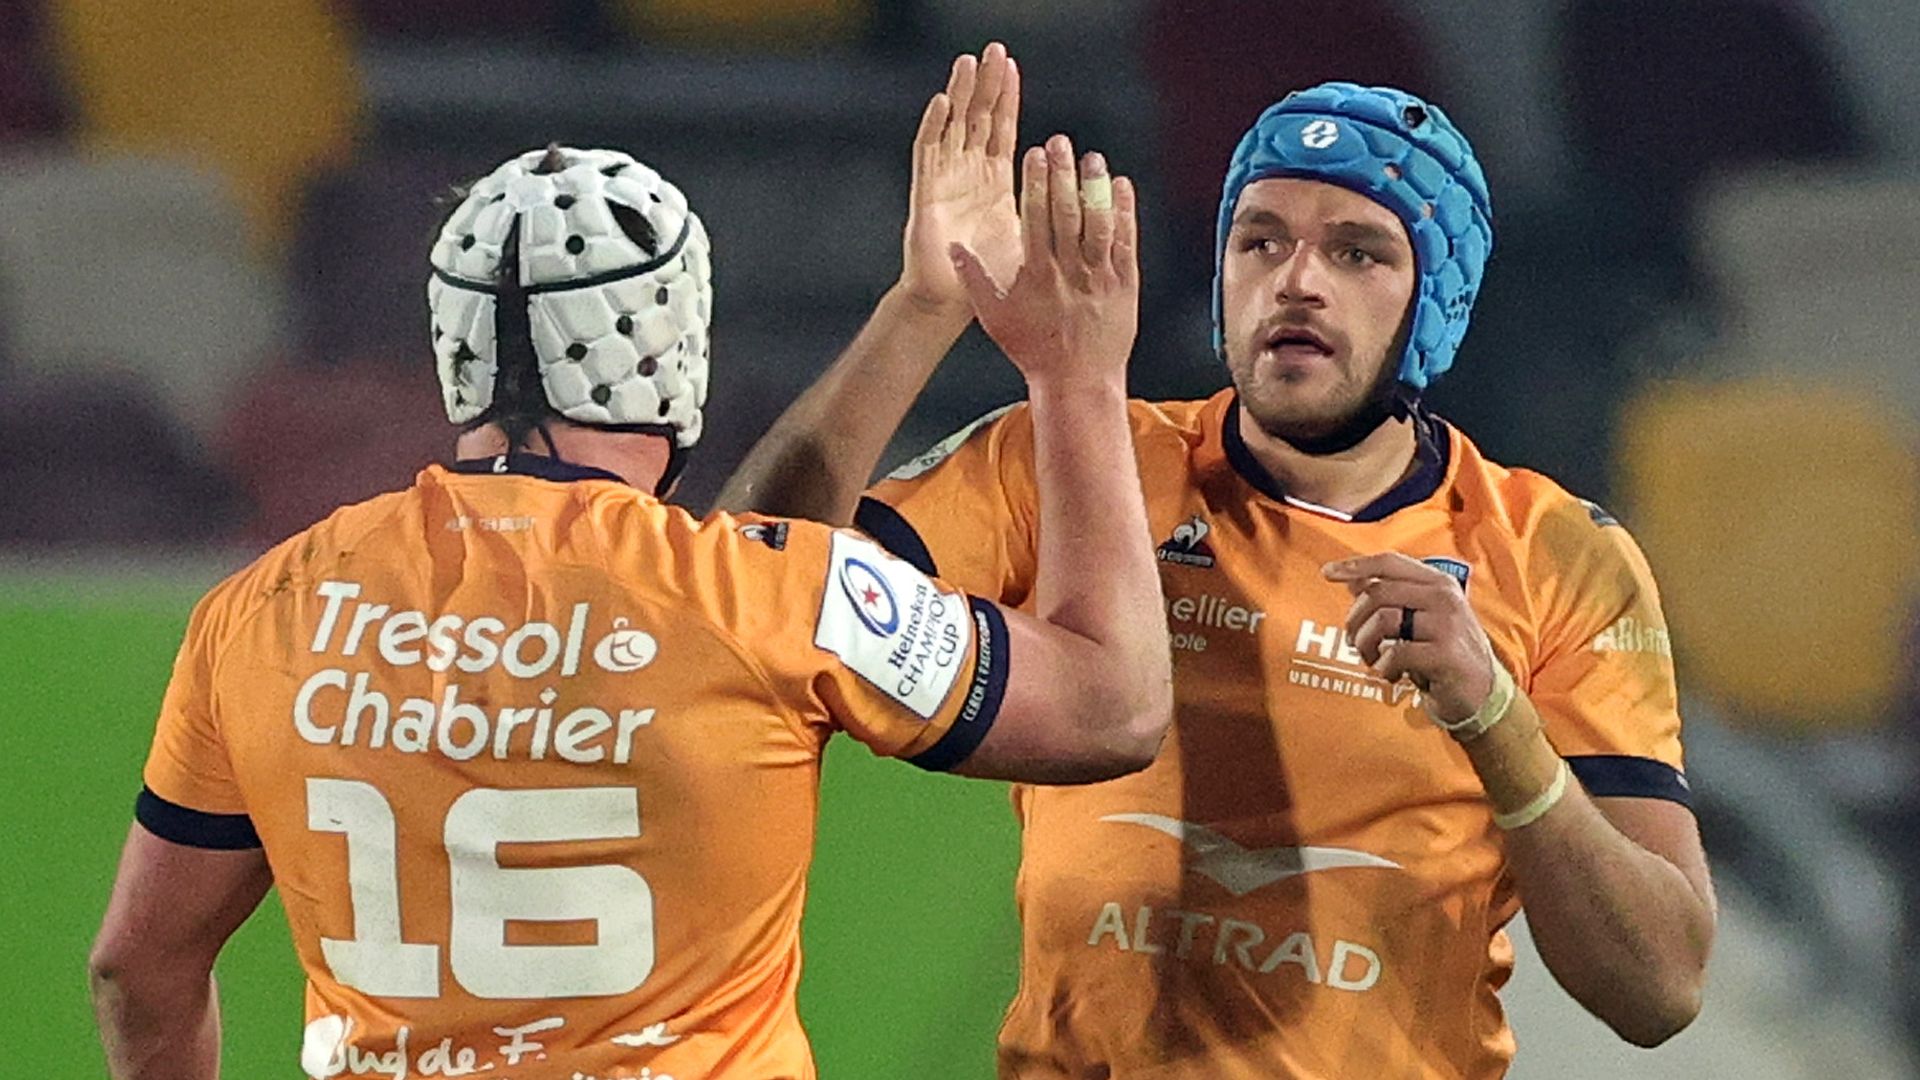 Creevy red card costs Irish in European Cup opener vs Montpellier